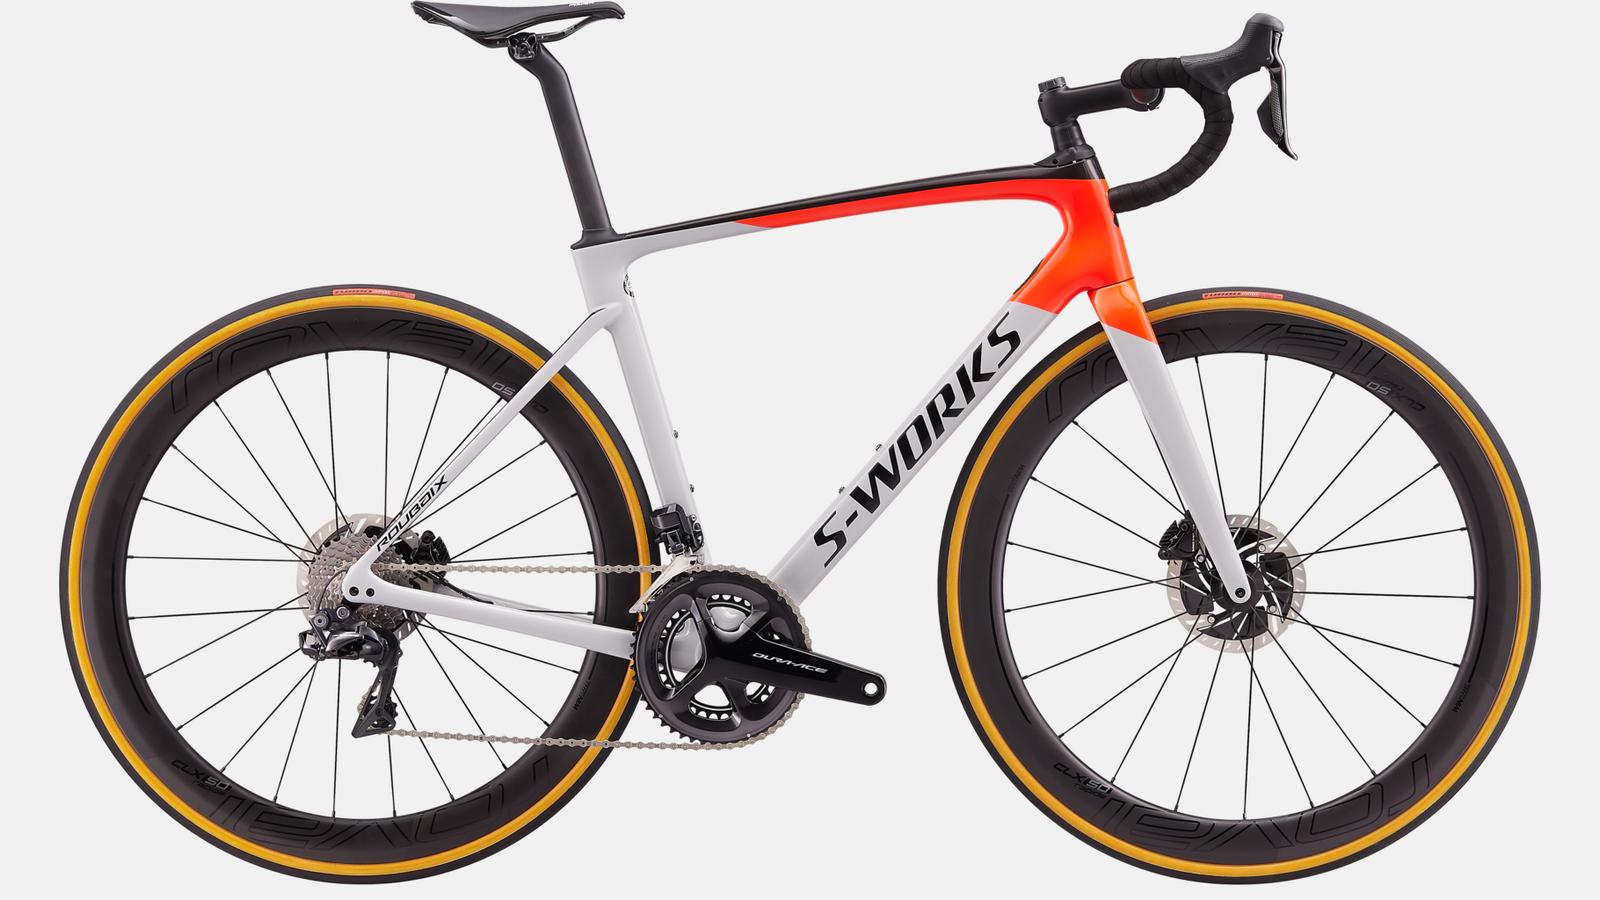 Paint for 2020 Specialized S-Works Roubaix - Shimano Dura-Ace Di2 - Gloss Dove Grey